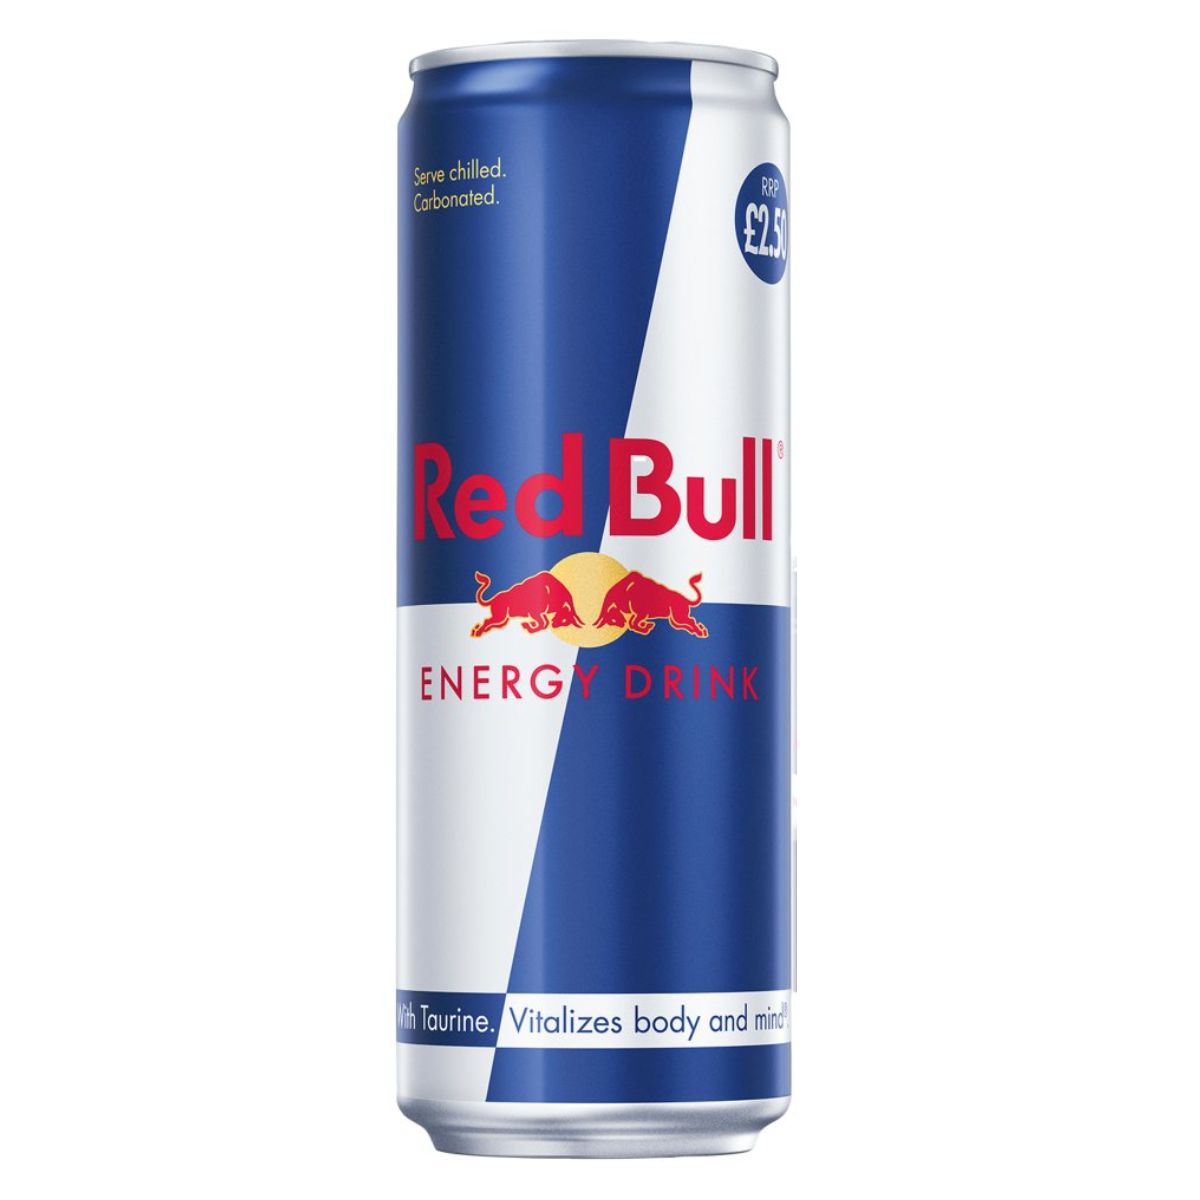 A can of Red Bull energy drink, featuring the logo with two red bulls charging at each other against a sun backdrop, on a blue and silver can.